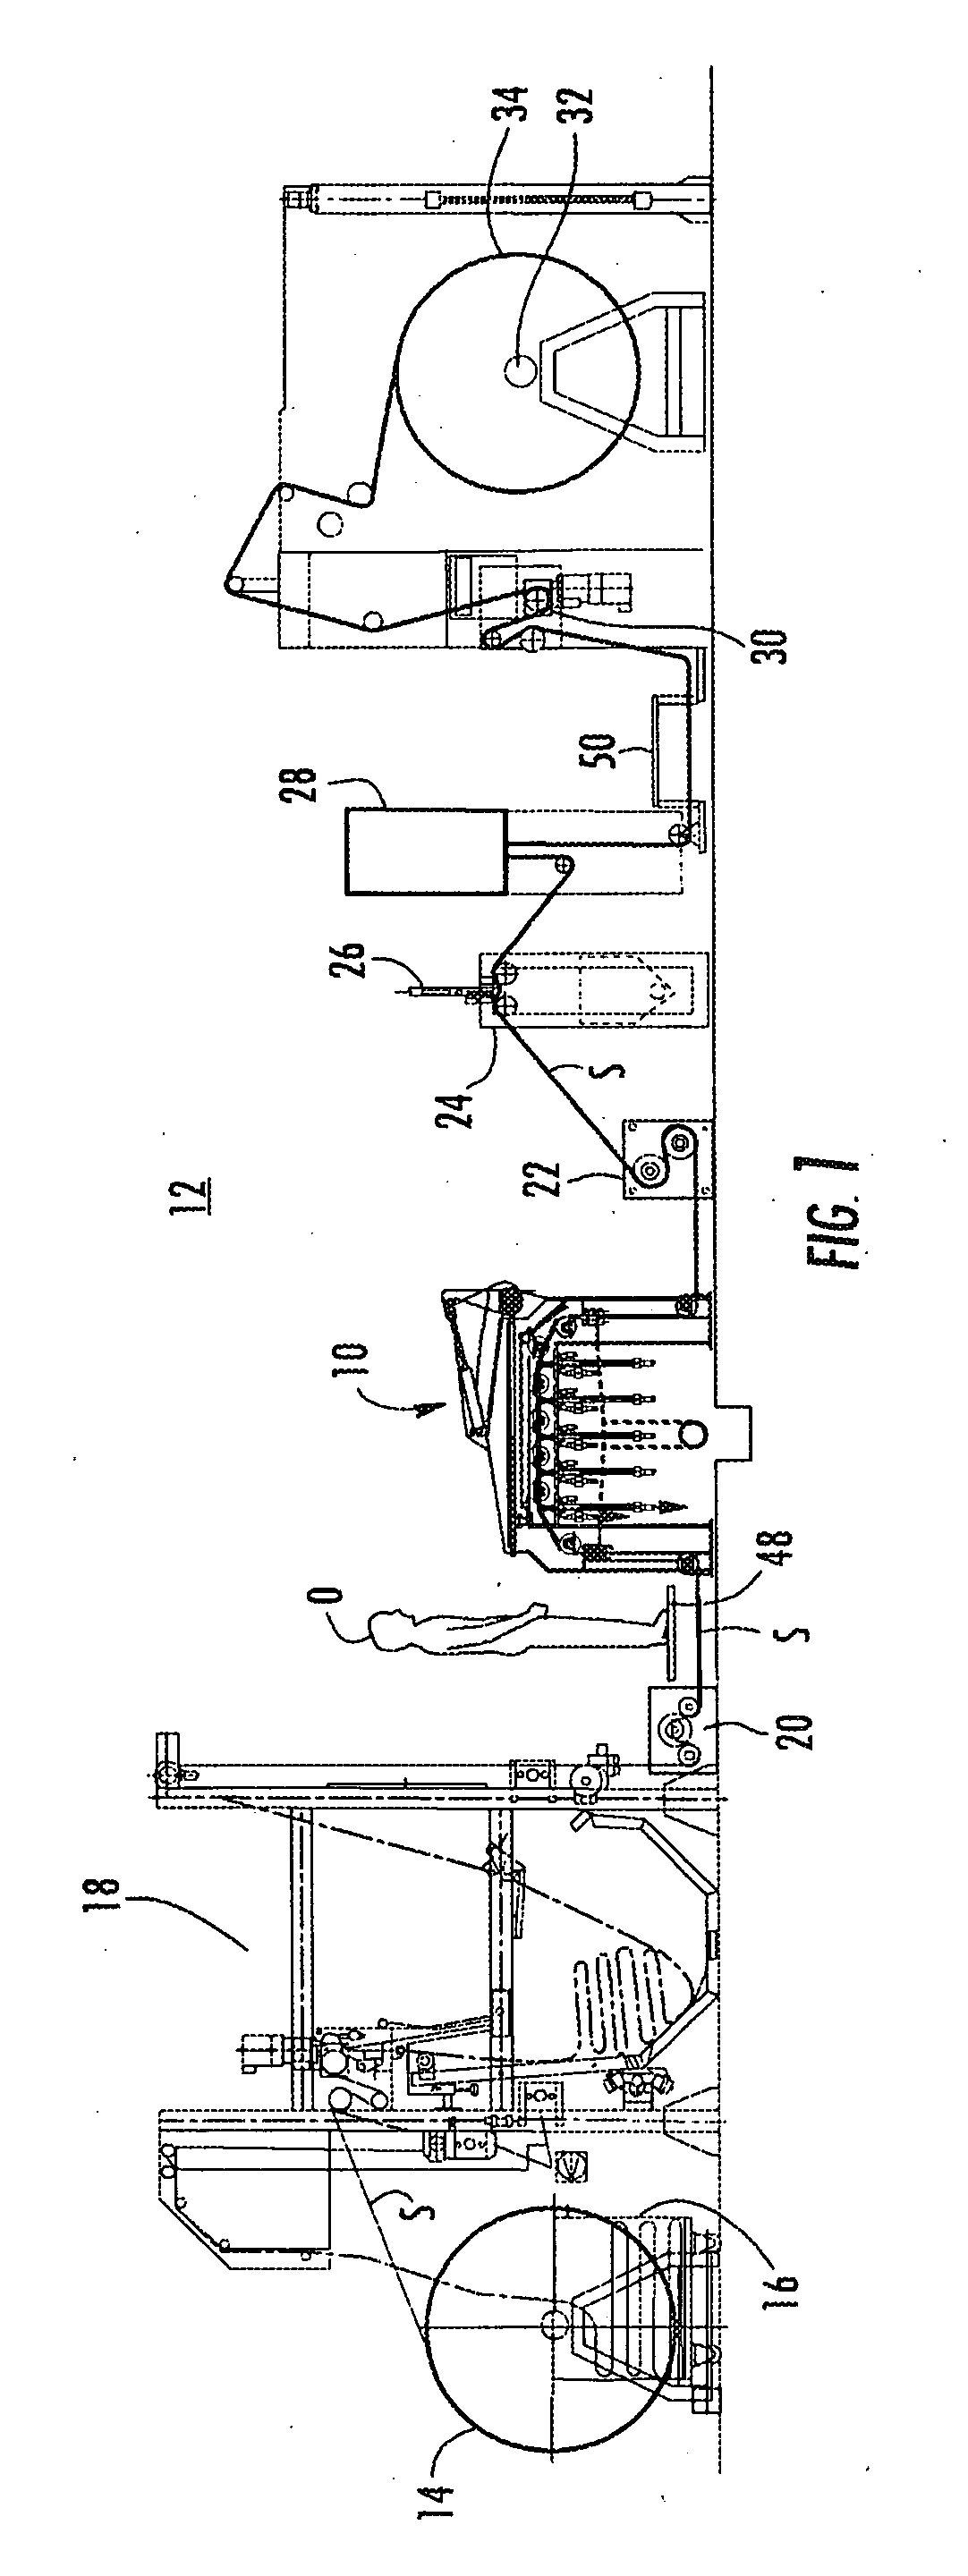 Apparatus for dyeing textile substrates with foamed dye